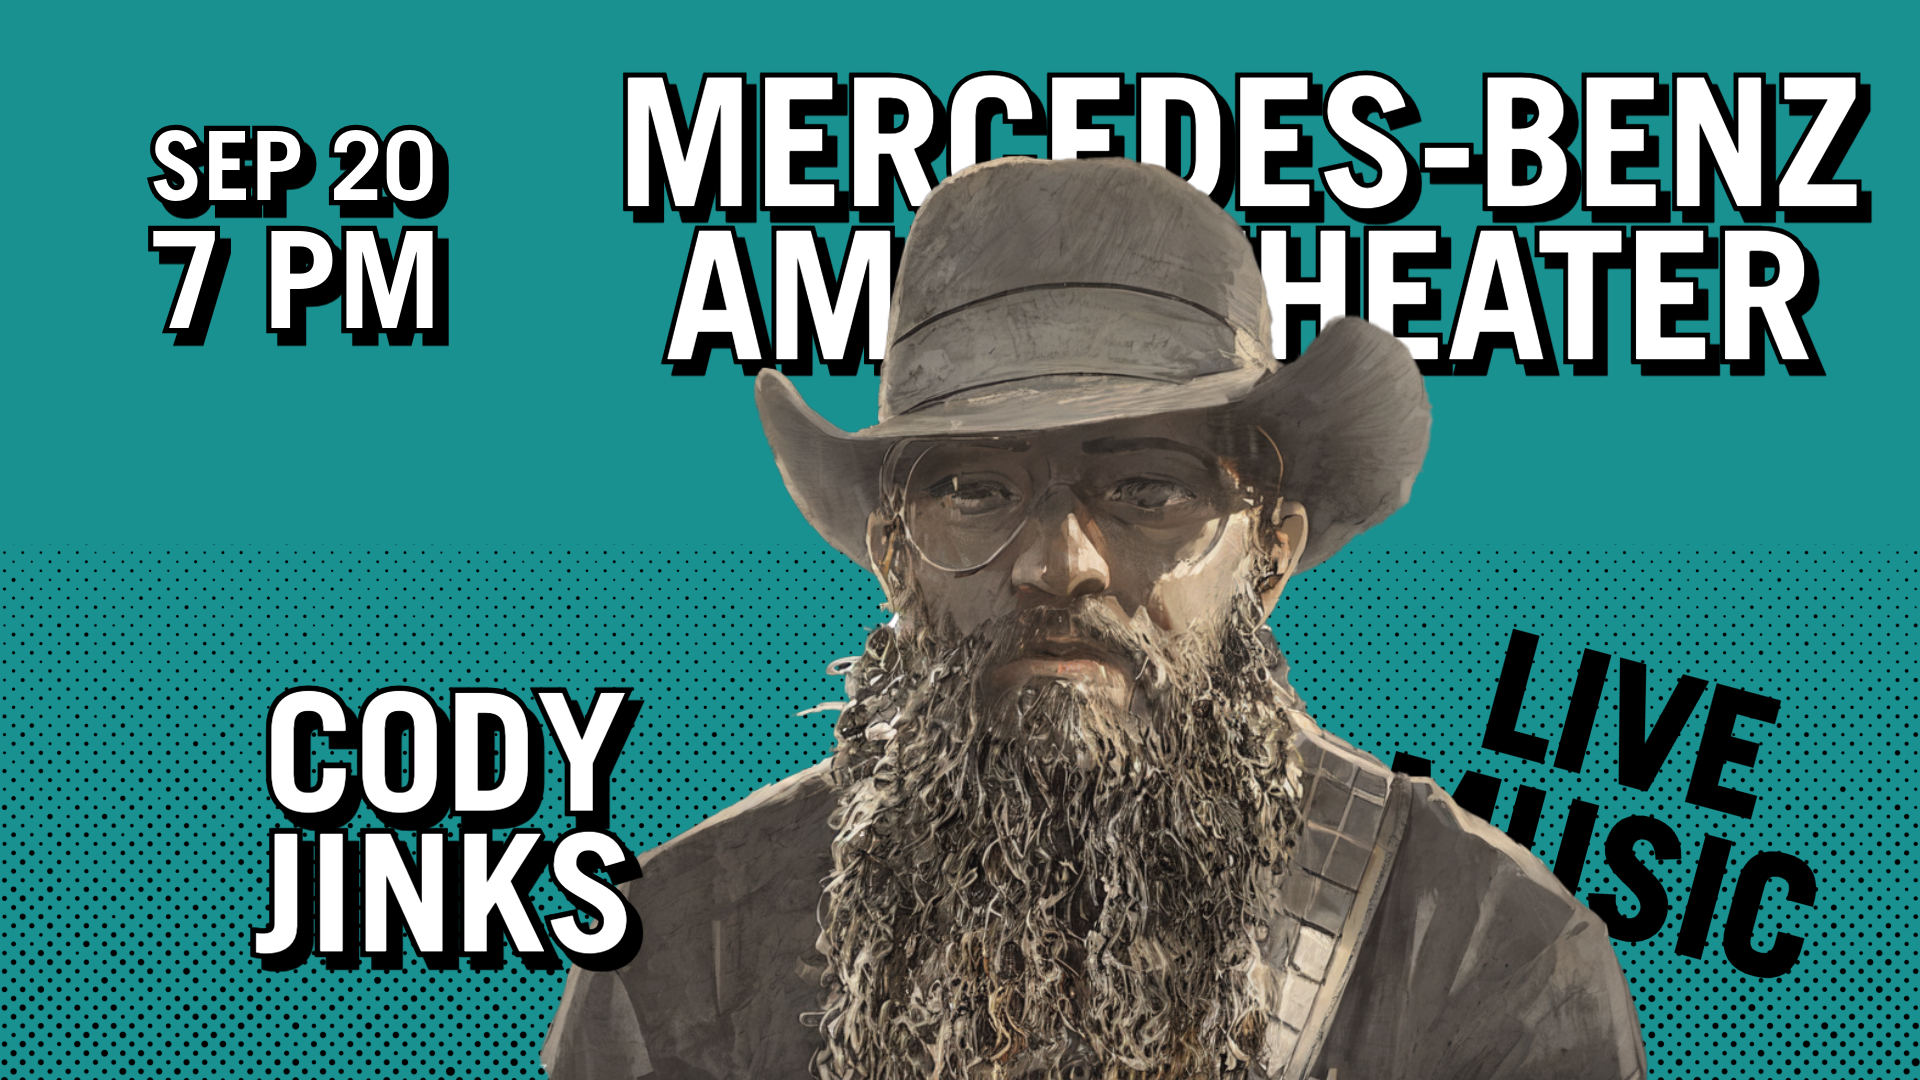 CODY JINKS at the Mercedes-Benz Amphitheater